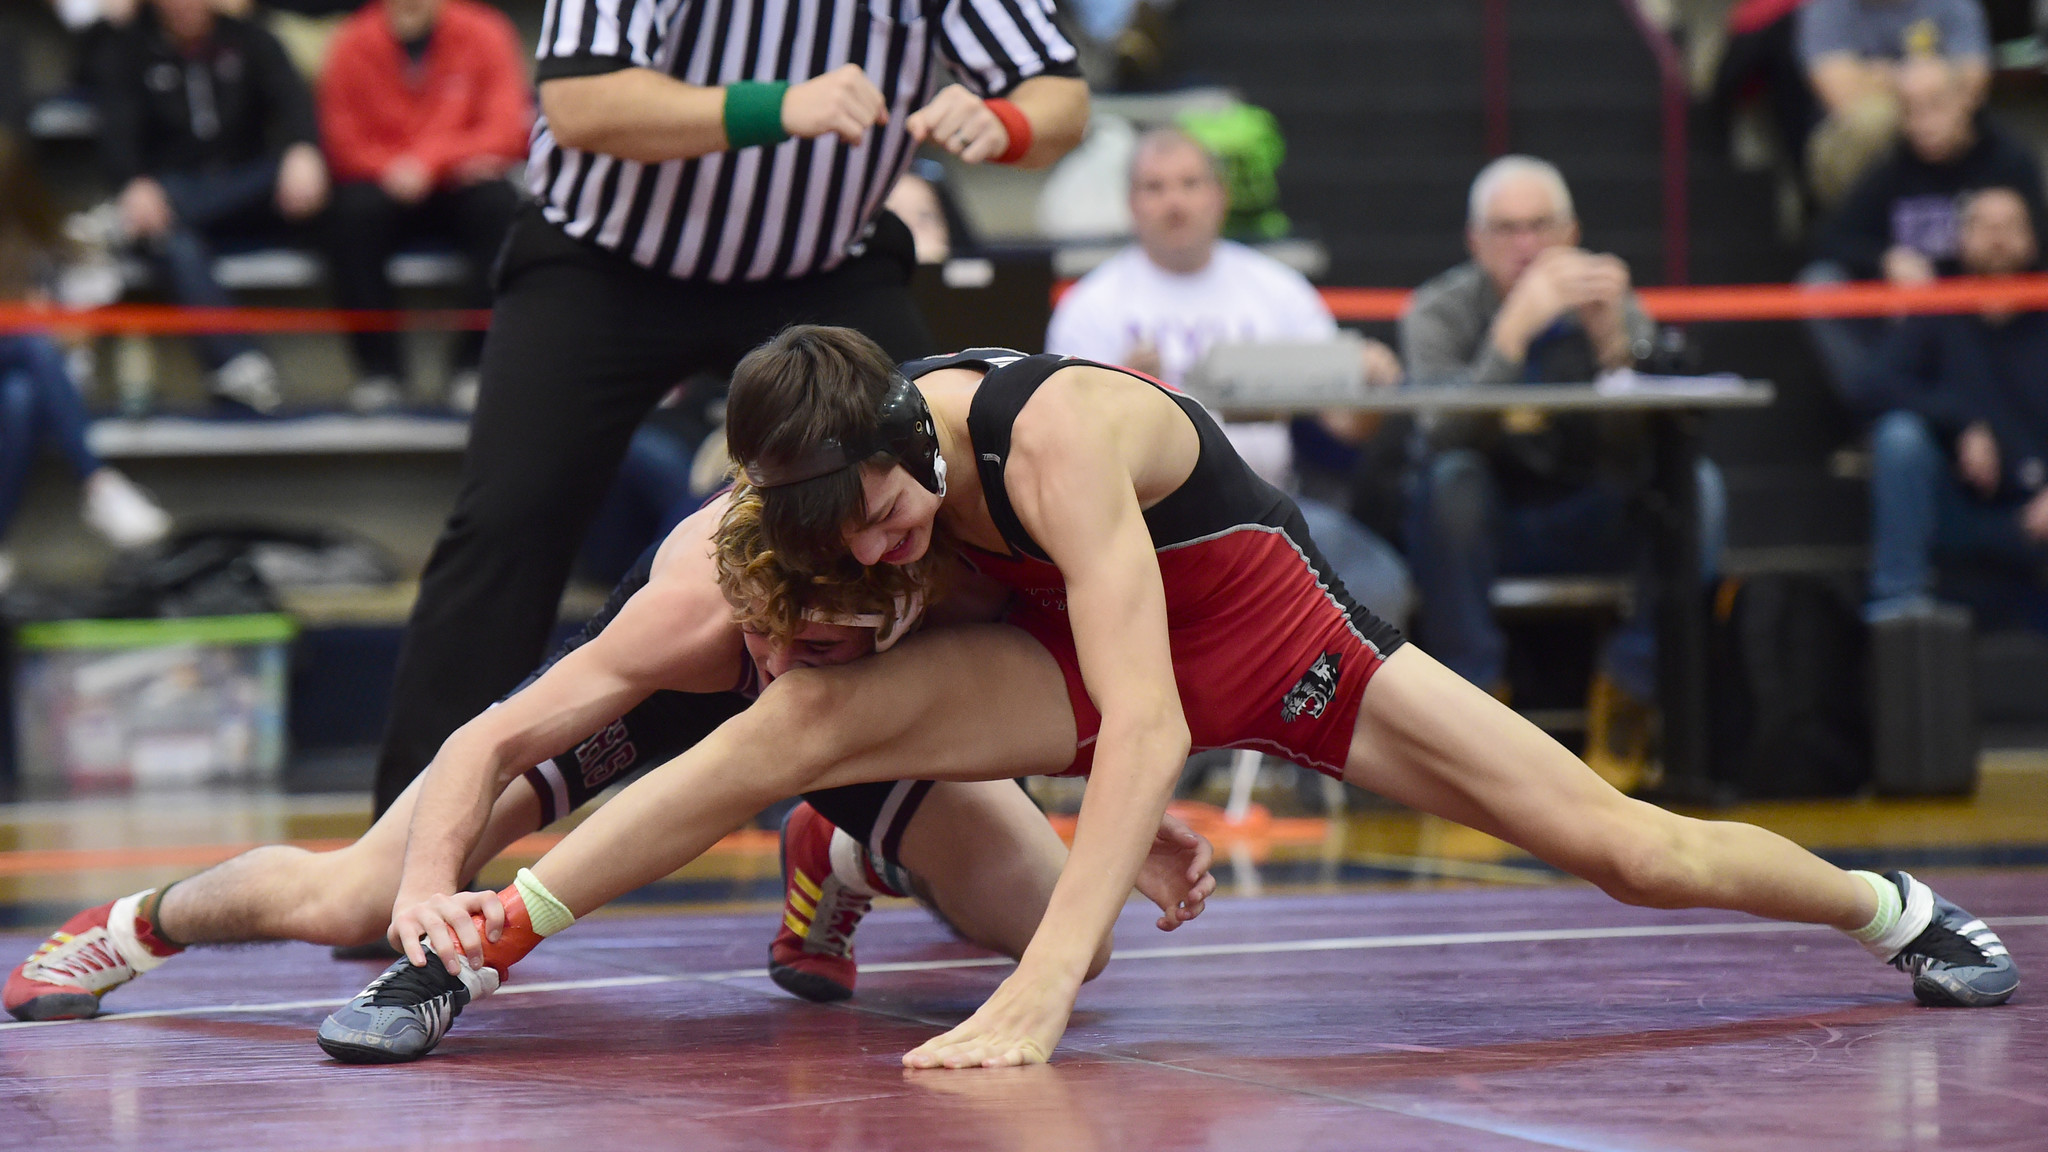 PICTURES: Bethlehem Holiday Wrestling Classic, Day 2 - The Morning Call